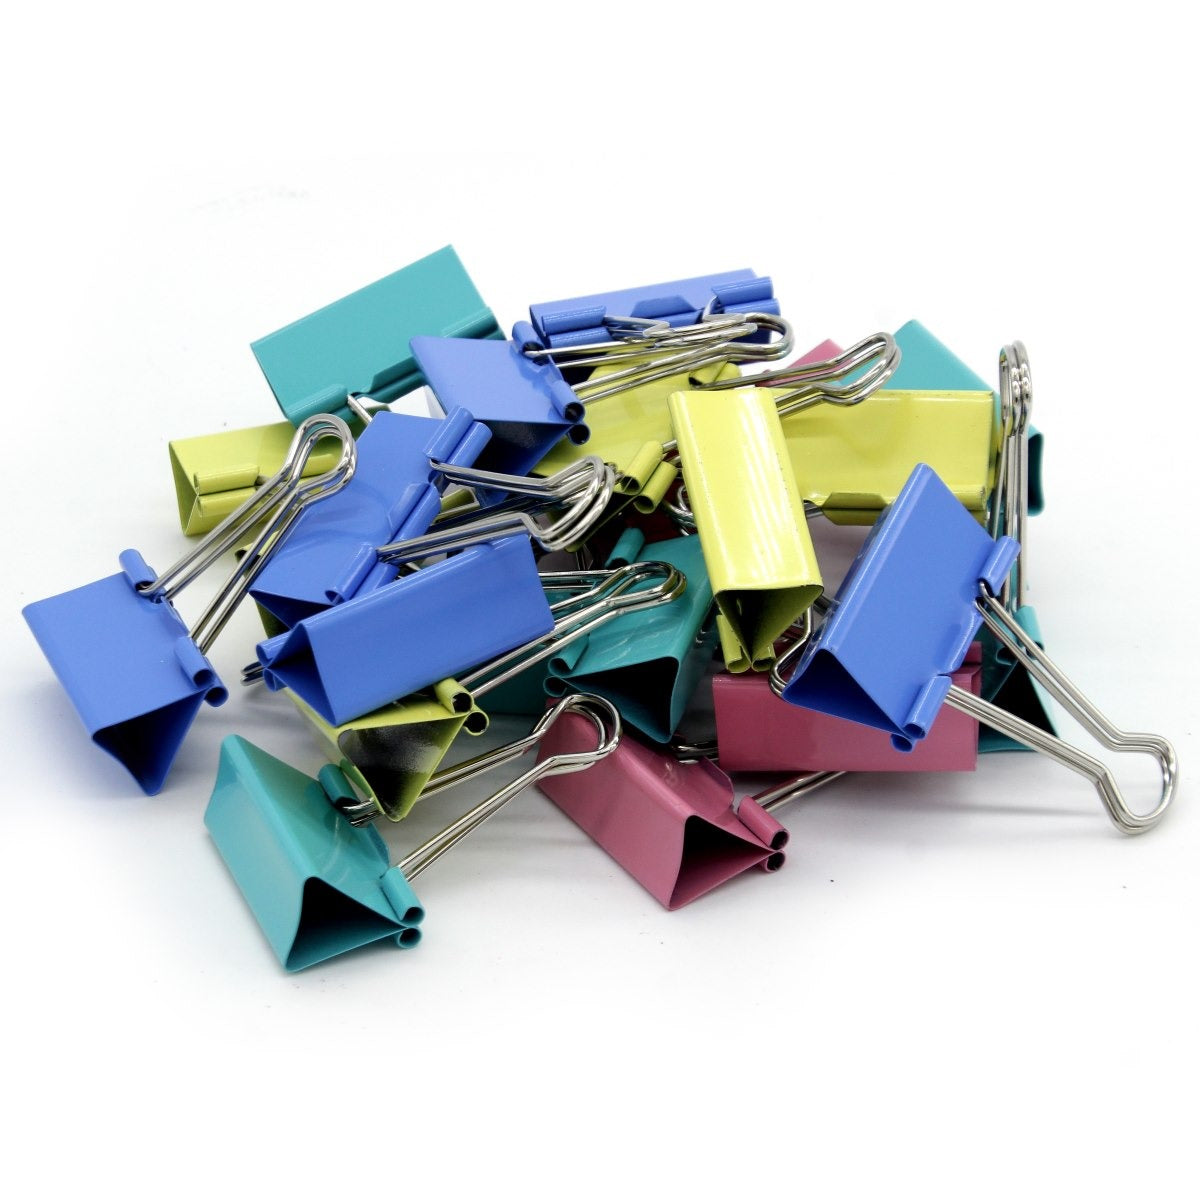 Set of 24 Pcs Binder Clips Assorted Colors 41mm - For Shops, Schools, Corporates, Office Use